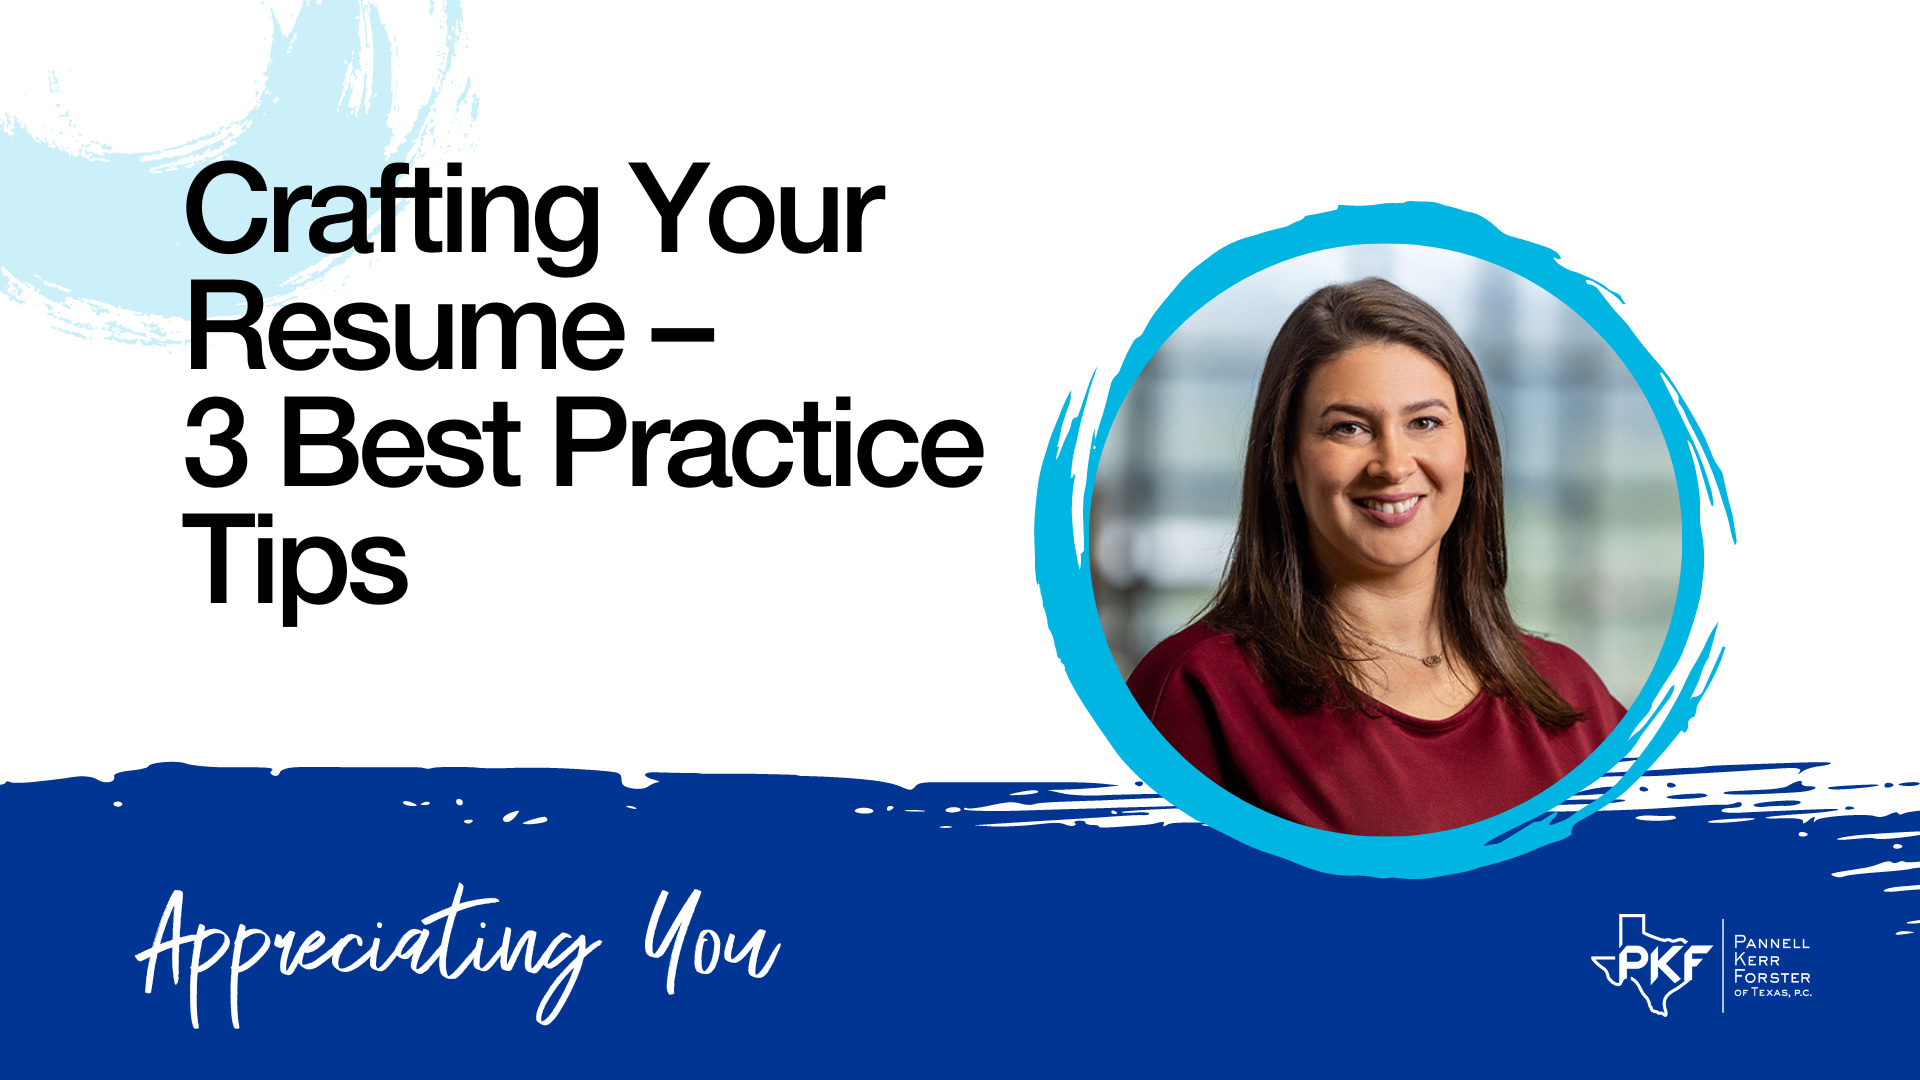 Video thumbnail image for "Crafting Your Resume - 3 Best Practice Tips"